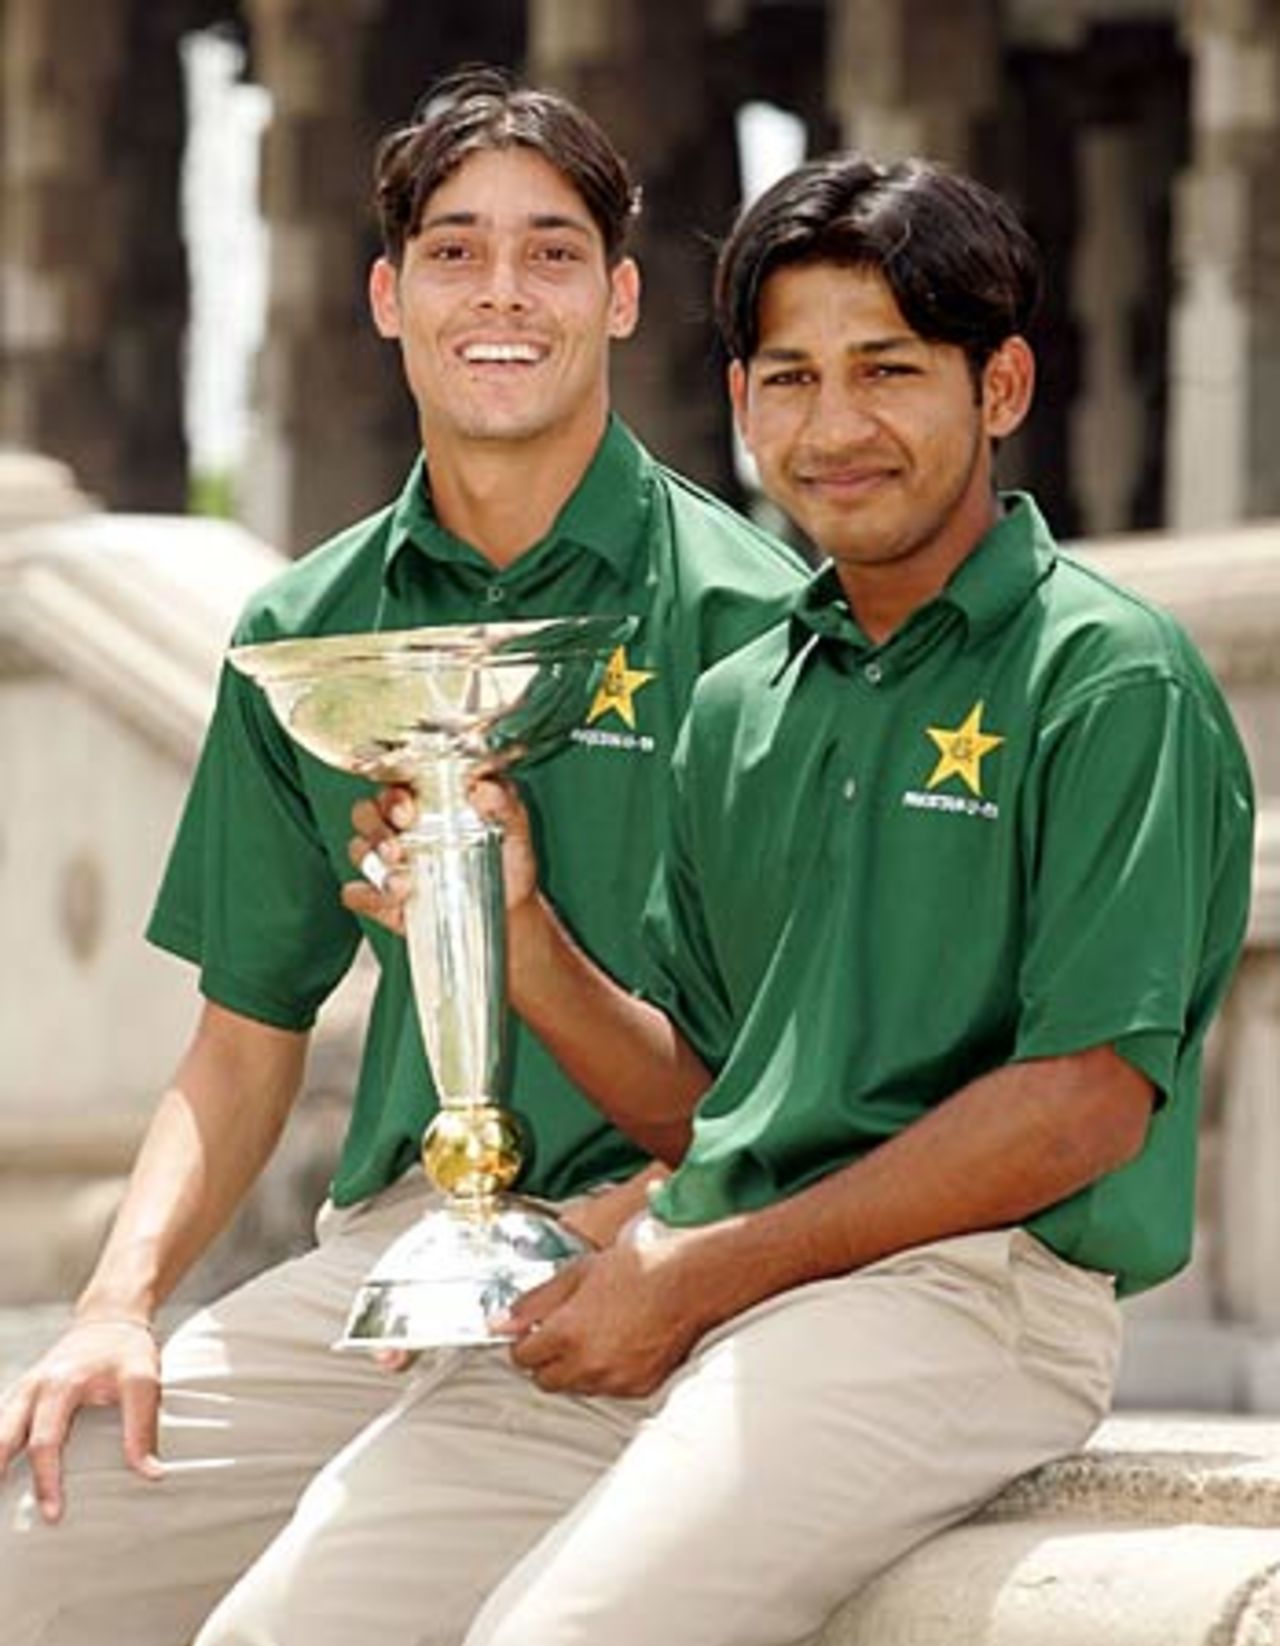 Pakistan captain Sarfraz Ahmed and Man of the Match  Anwar Ali with the Under-19 World Cup trophy in Independence Square, Colombo, February 20, 2006